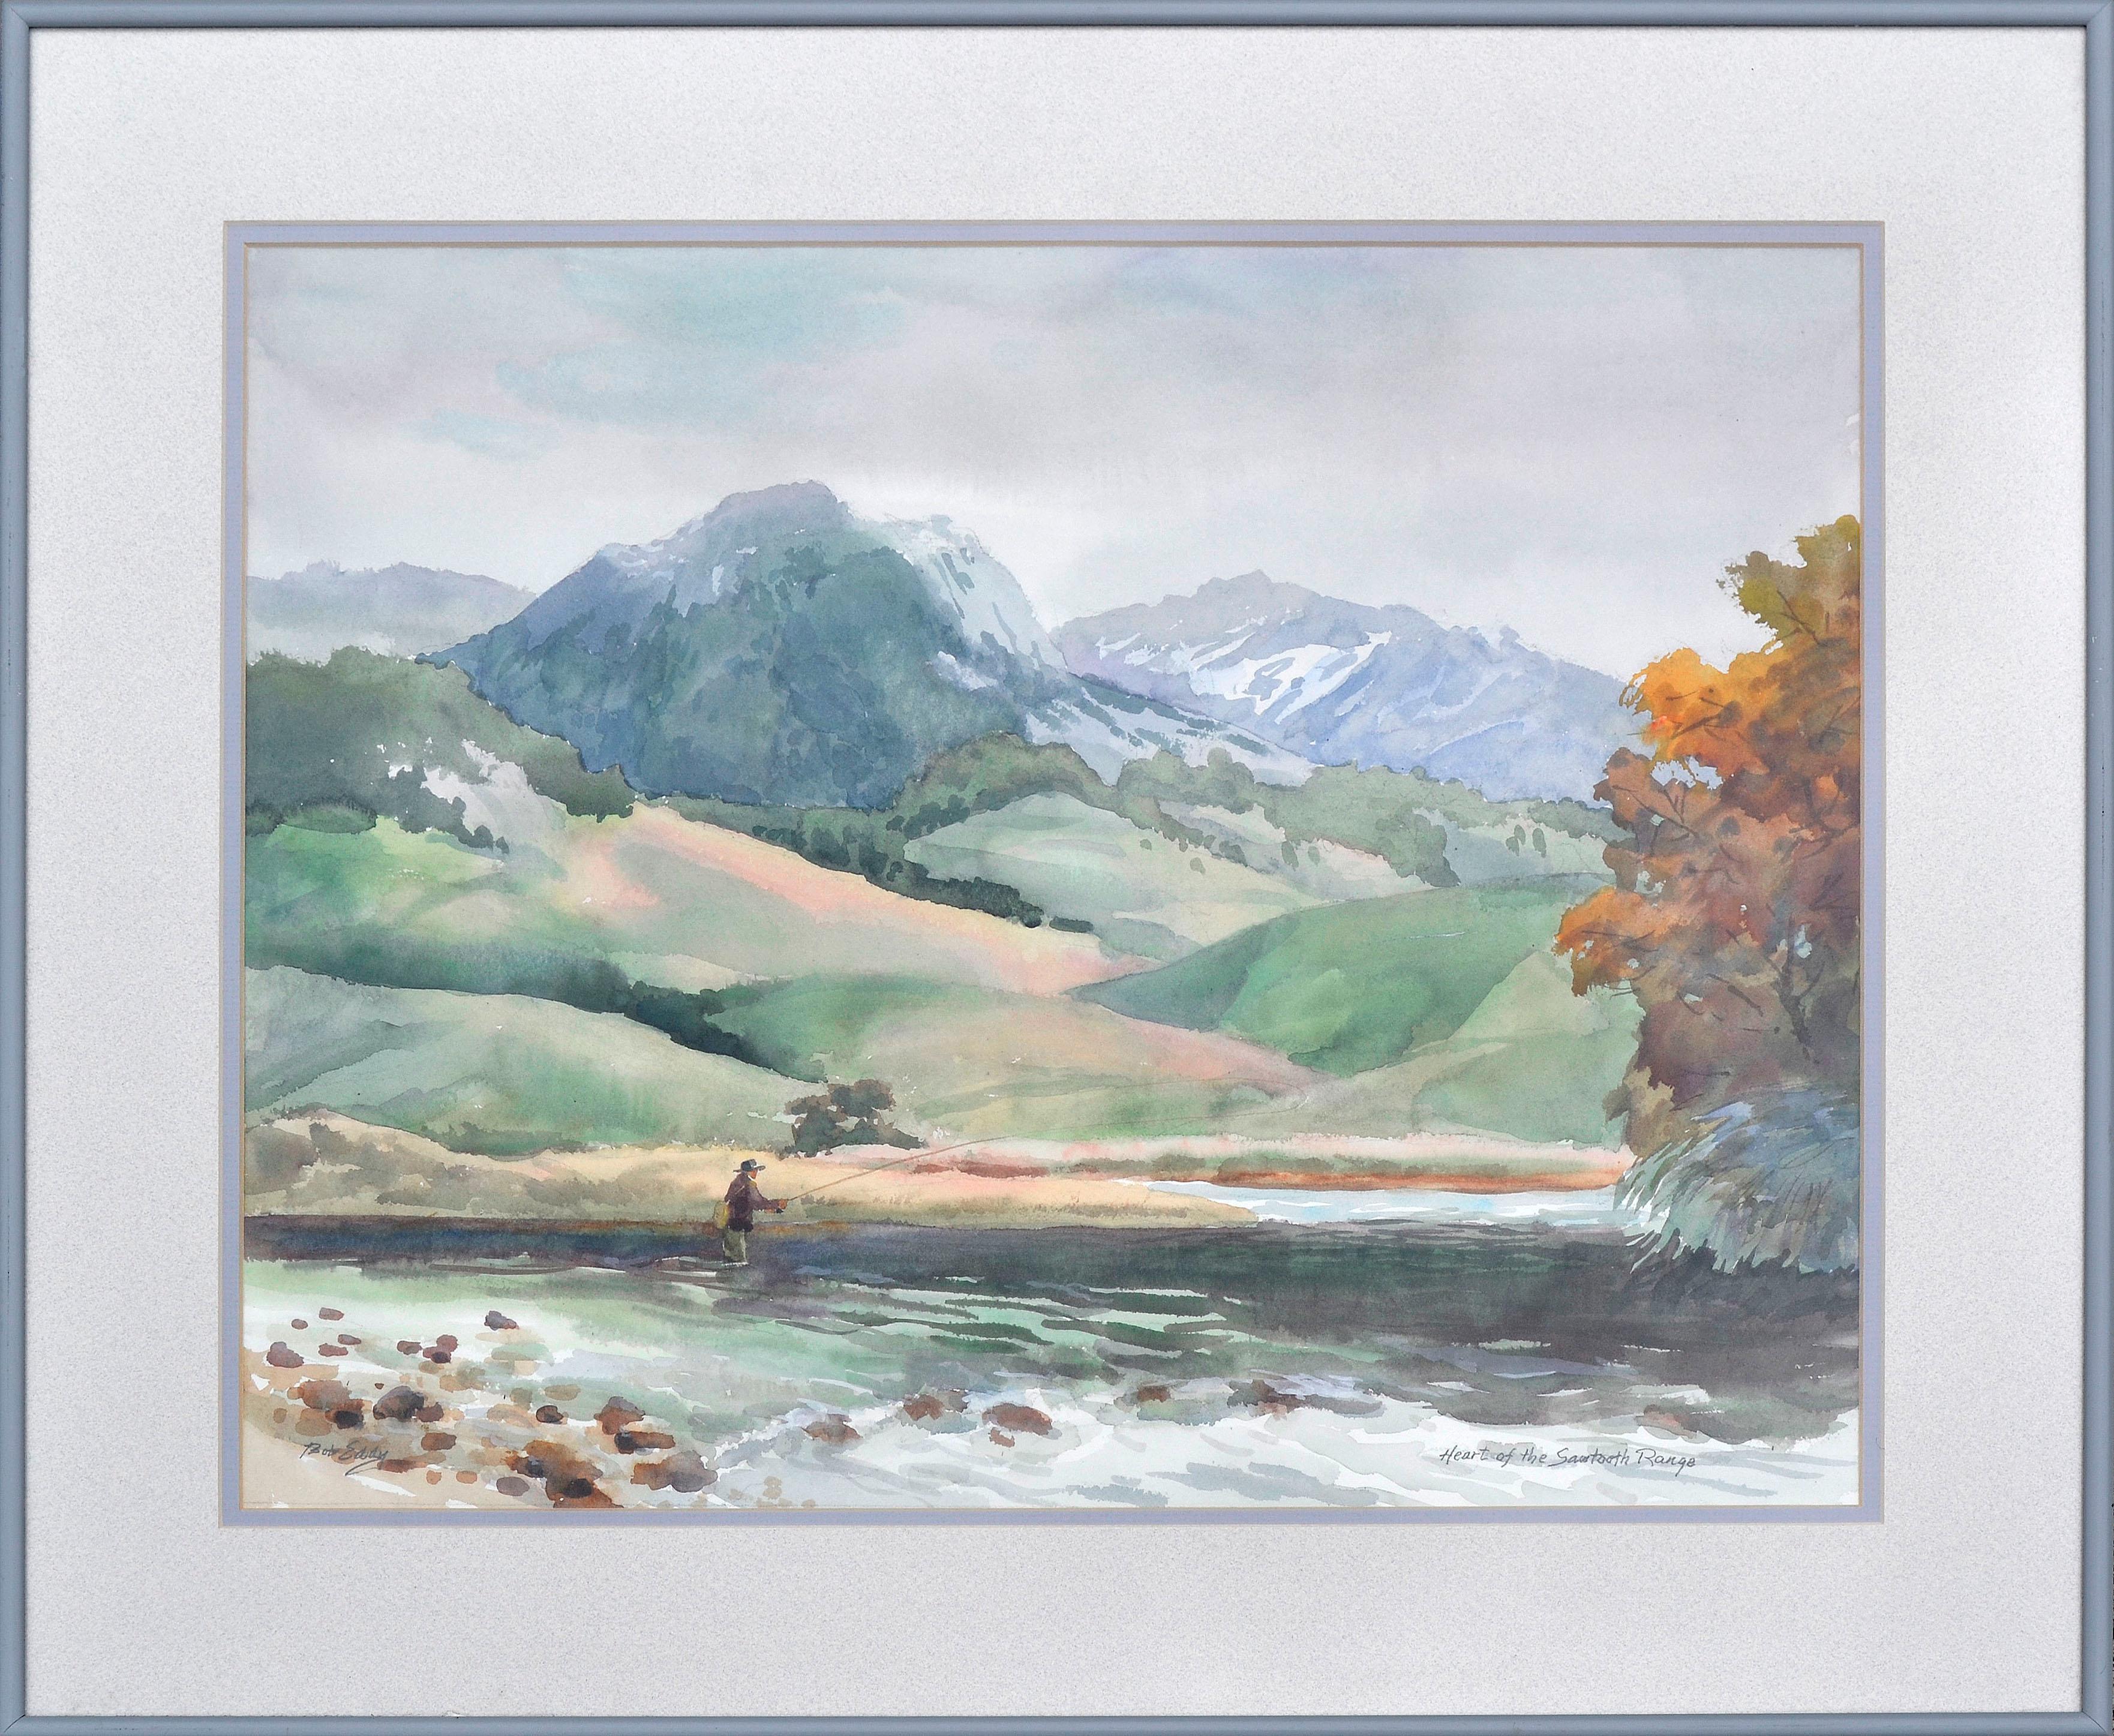 Robert E. Eddy Landscape Painting - Fly Fishing in the Heart of the Sawtooth Range - Landscape